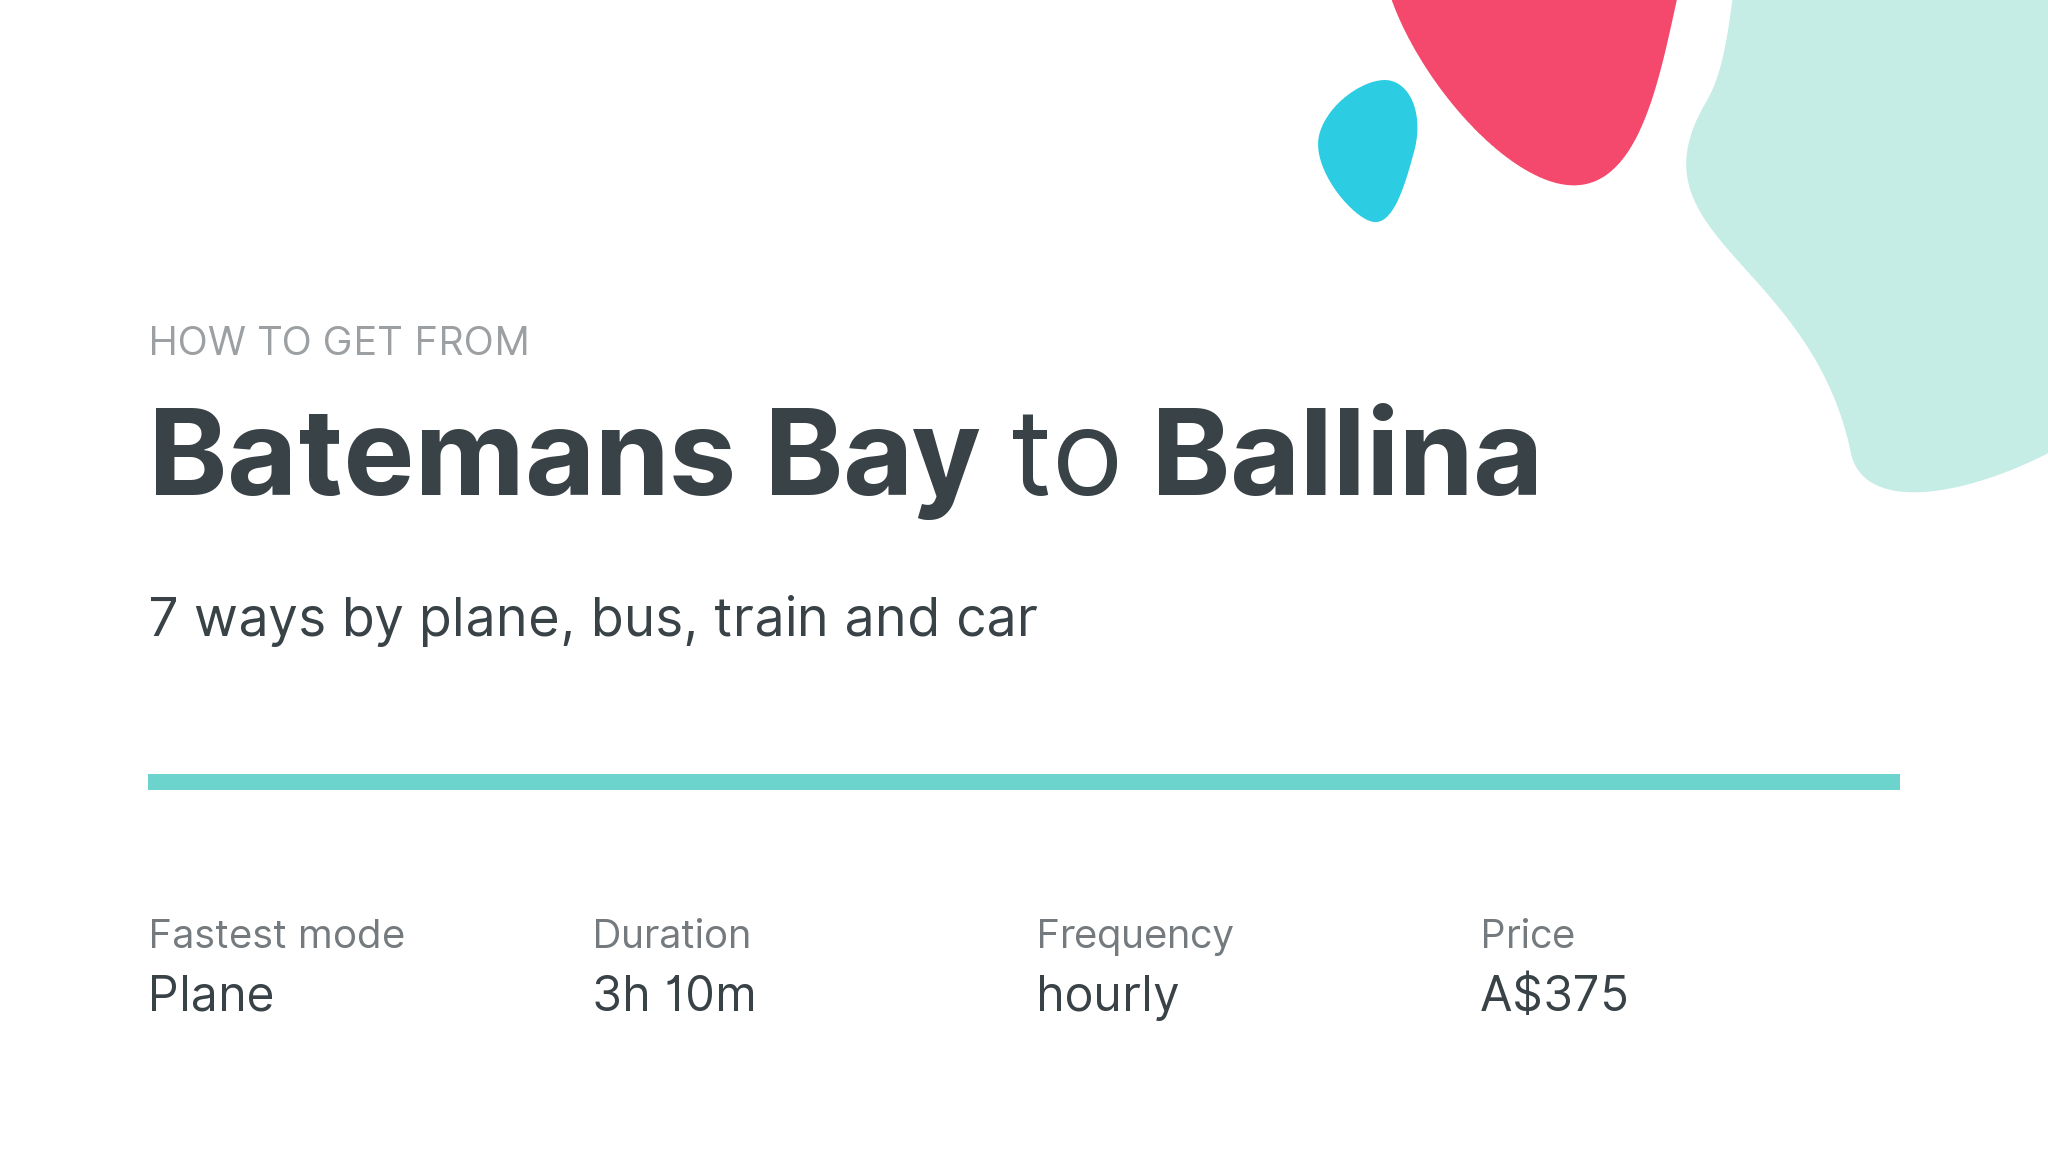 How do I get from Batemans Bay to Ballina